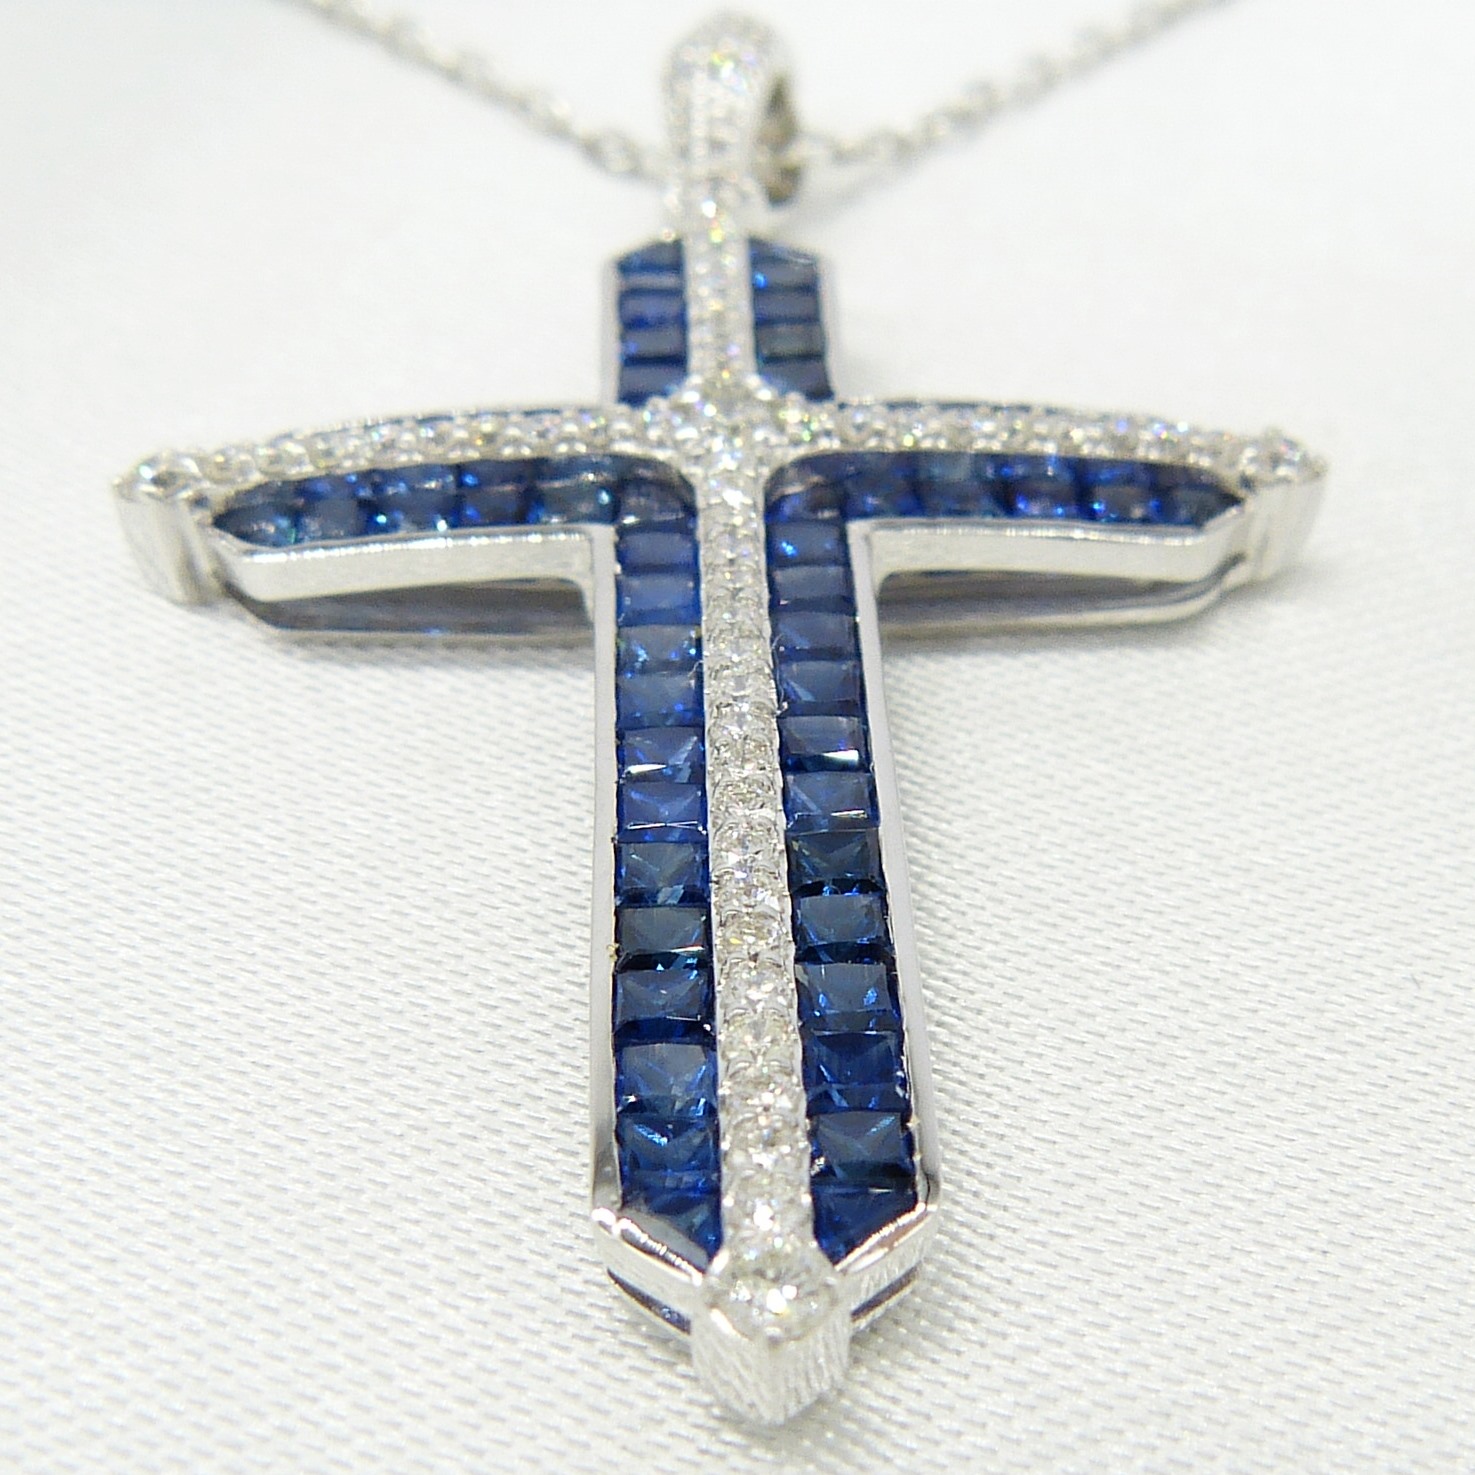 Impressive cross necklace set with natural sapphires and diamonds in 18ct white gold, boxed - Image 5 of 8